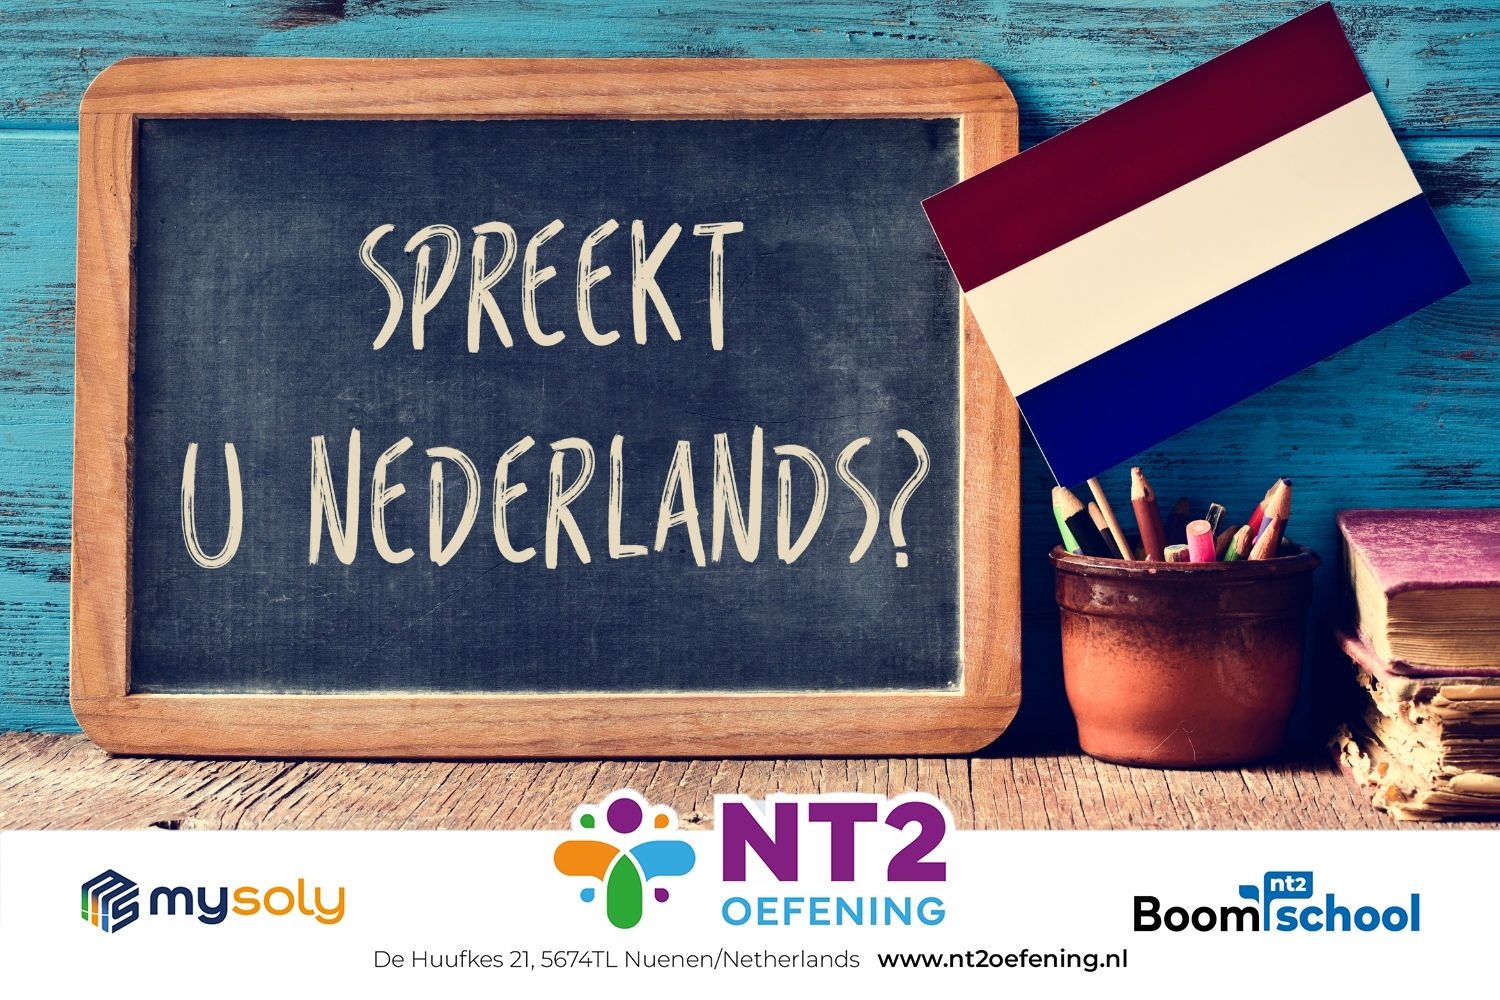 A blackboard with the words "Spreekt Nederlands?" and a Dutch flag next to it